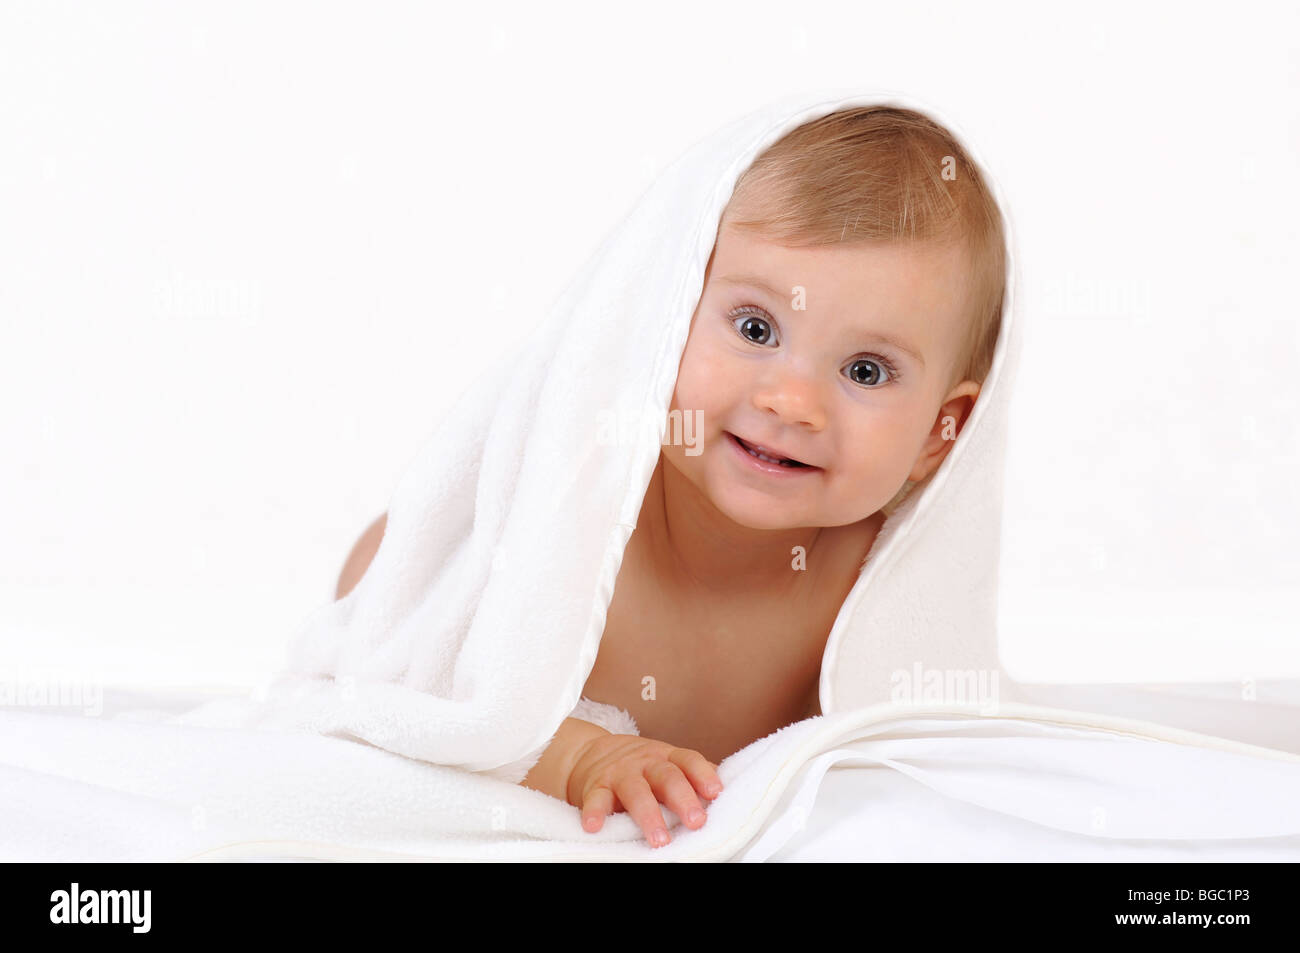 Little baby portrait on the white background Stock Photo